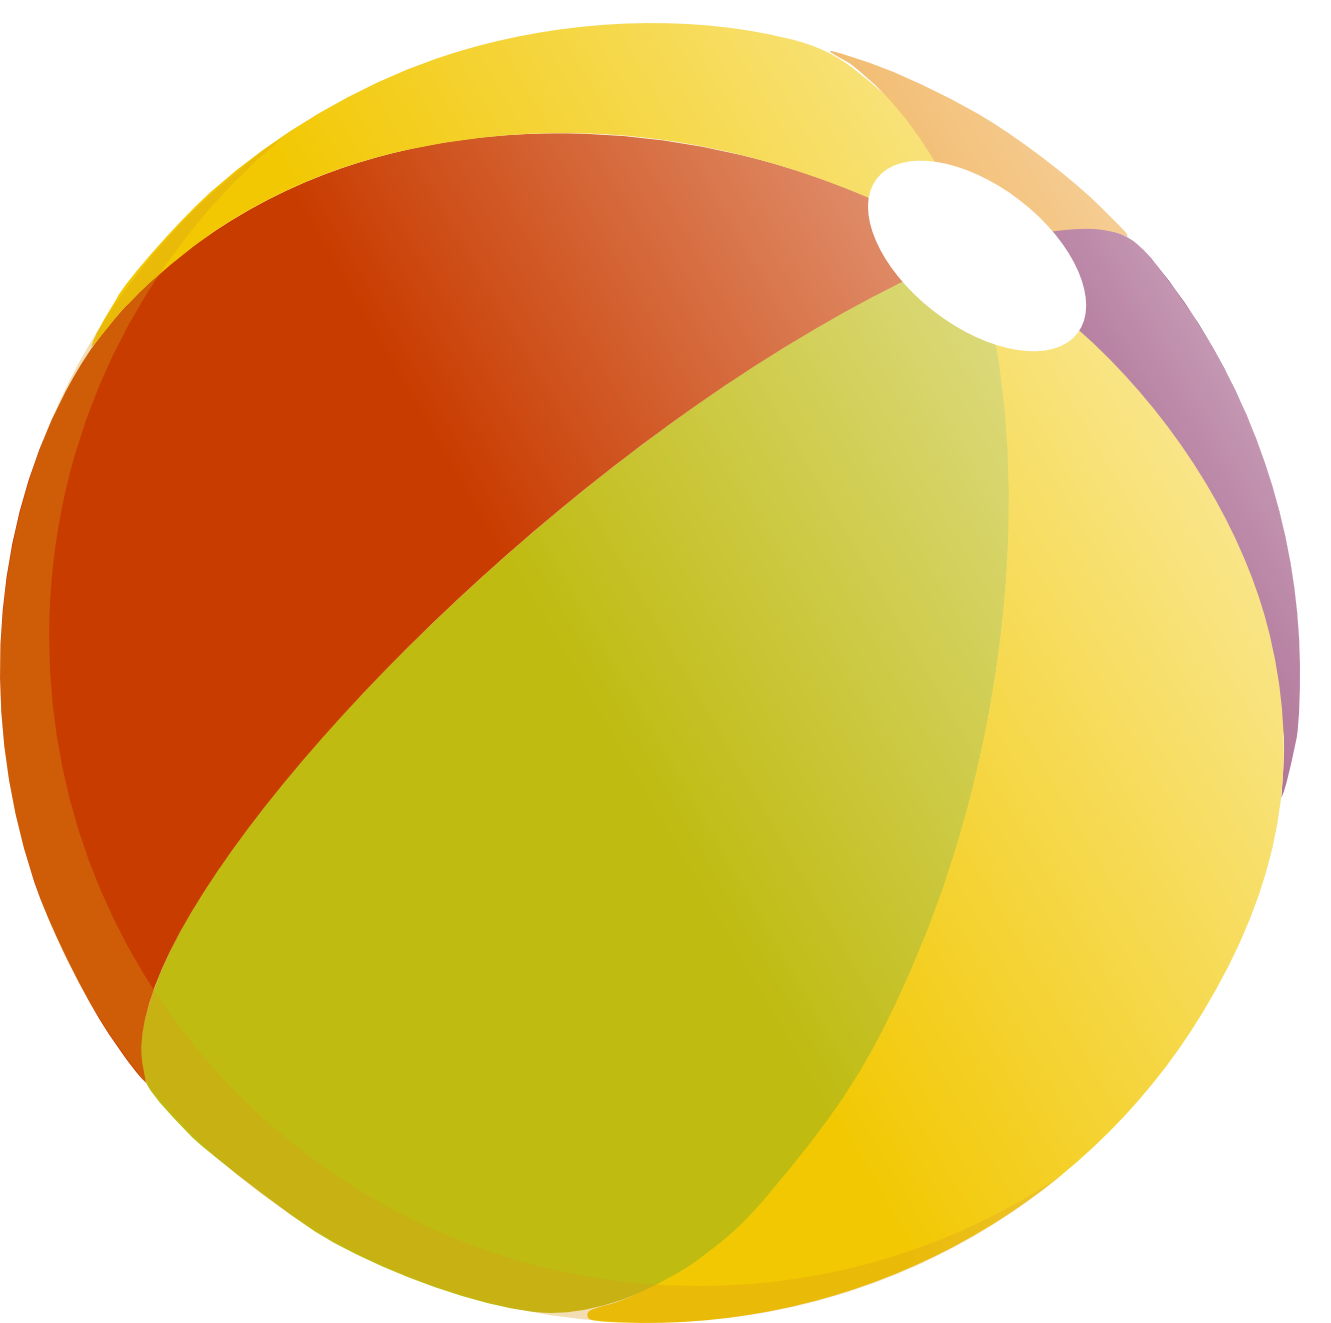 Picture Of A Beach Ball - ClipArt Best